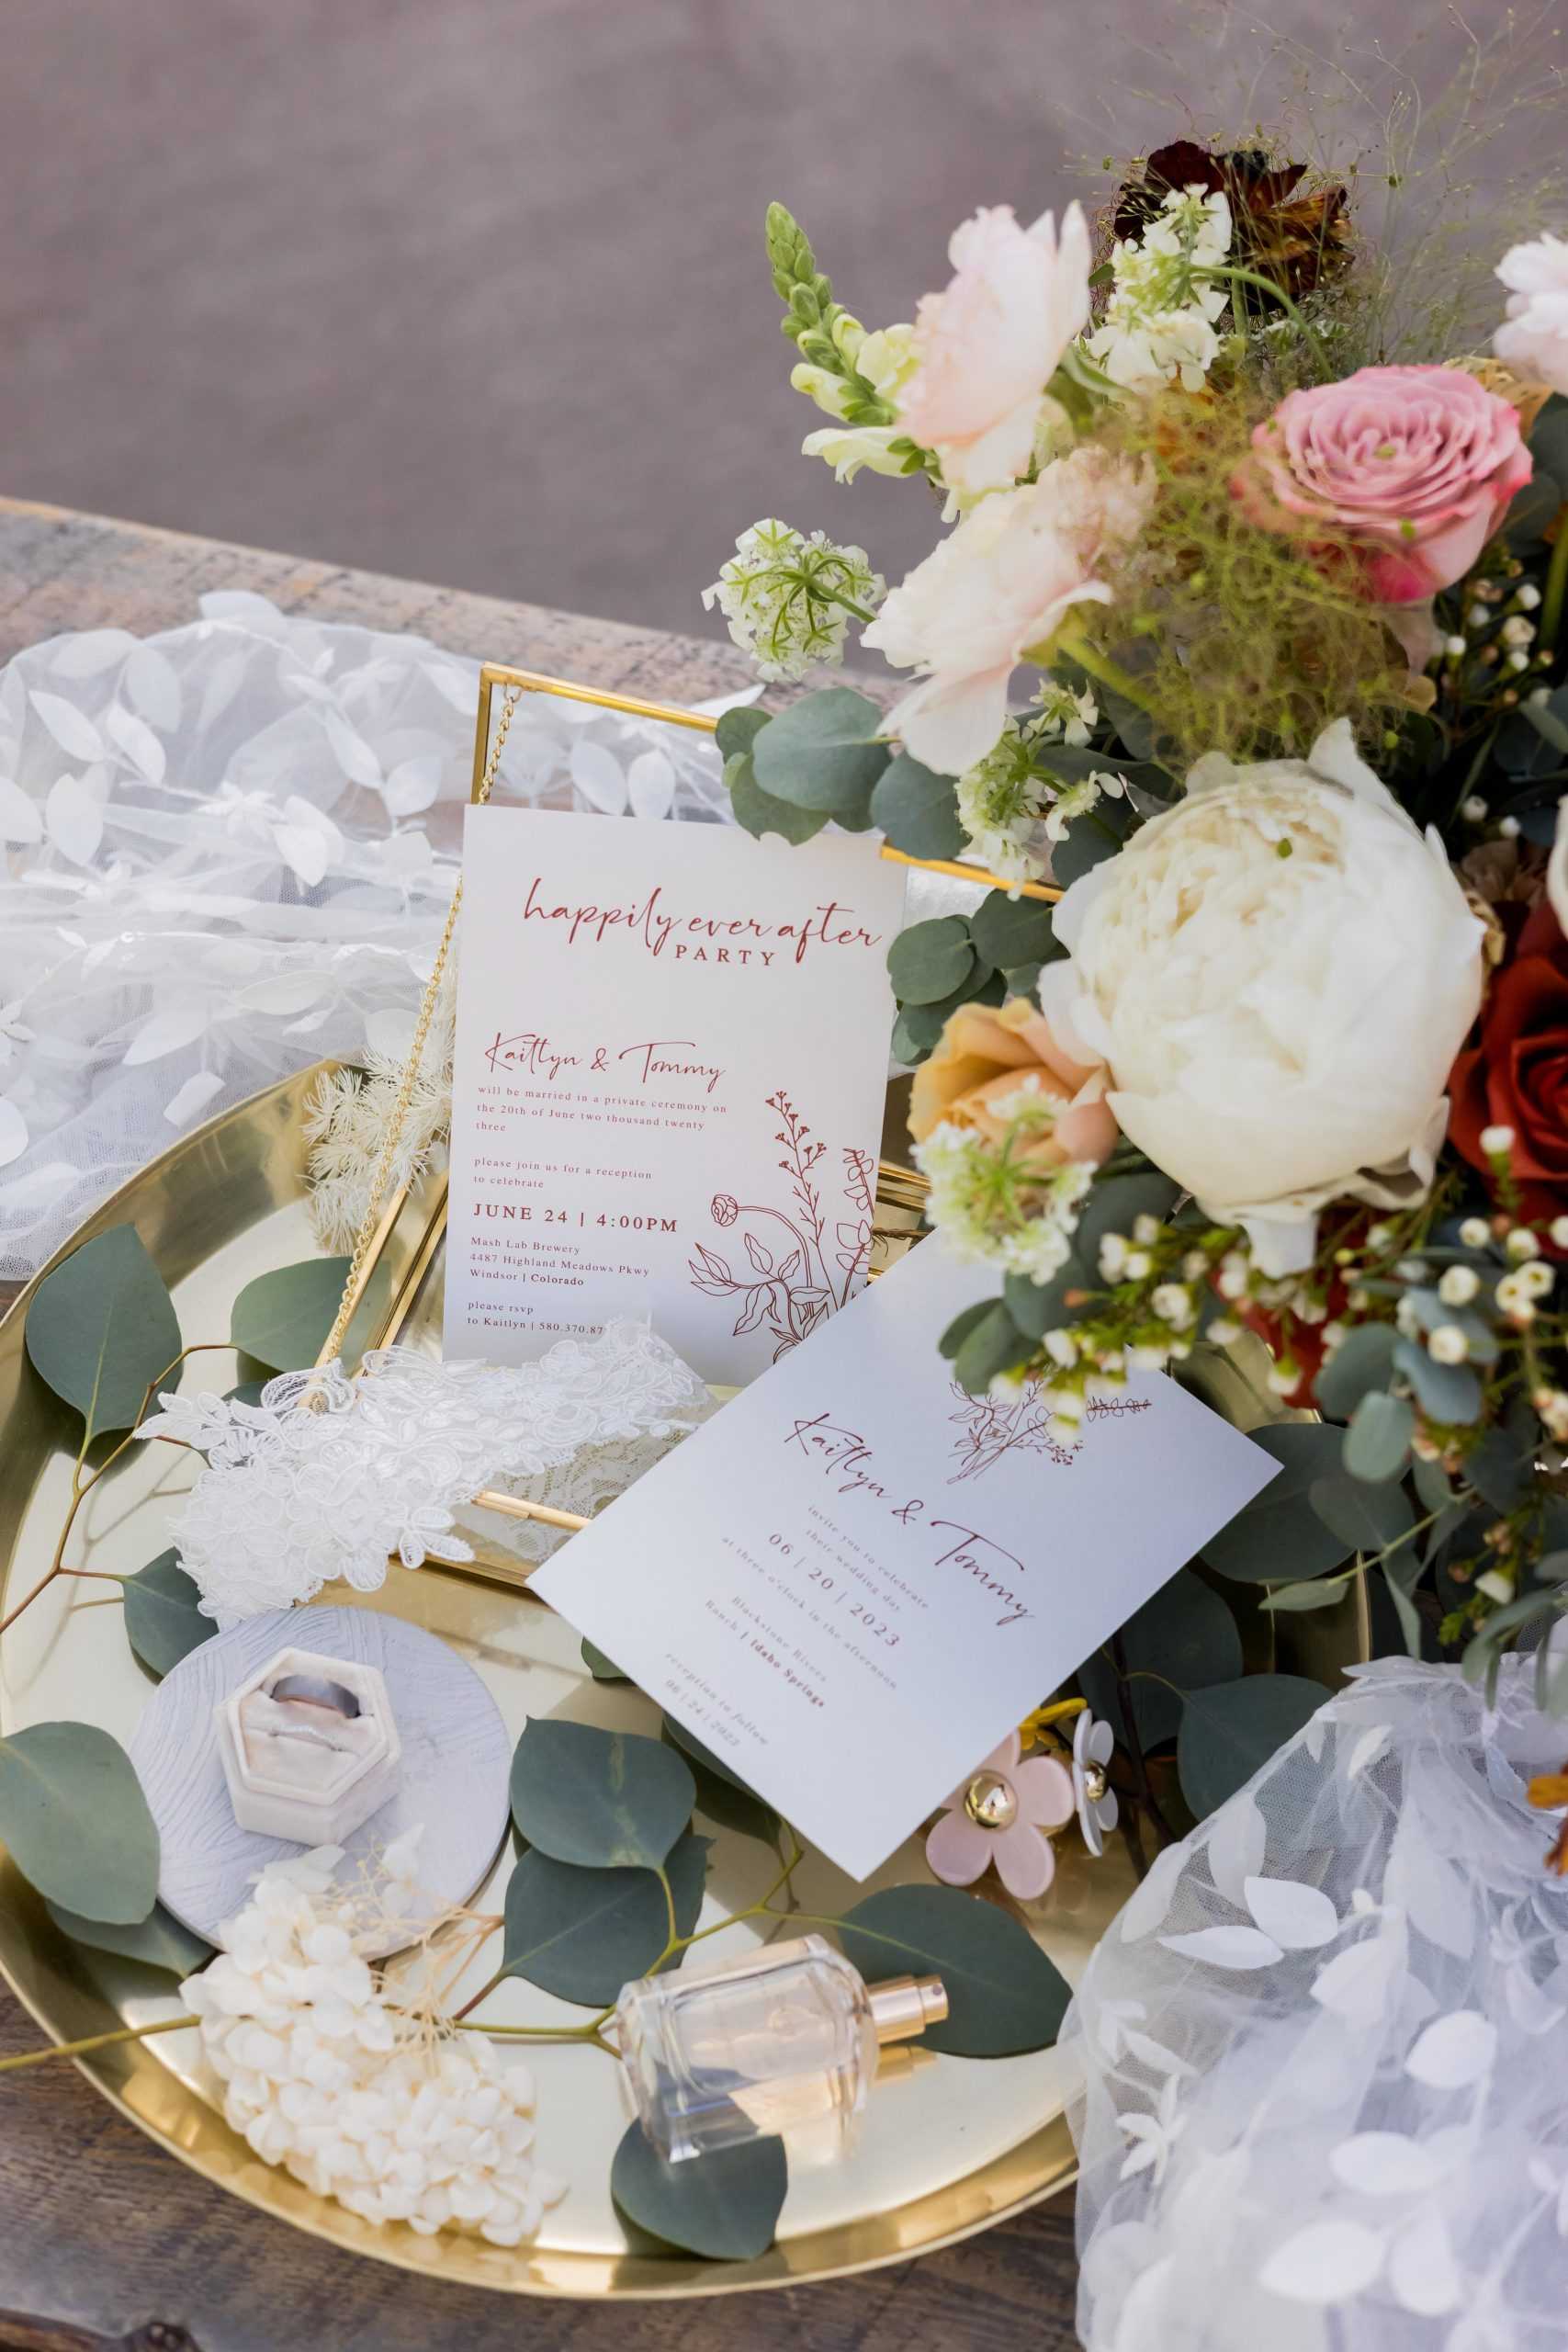 Wedding invites, a bouqet of flowers, and other wedding details on a table at a Colorado wedding